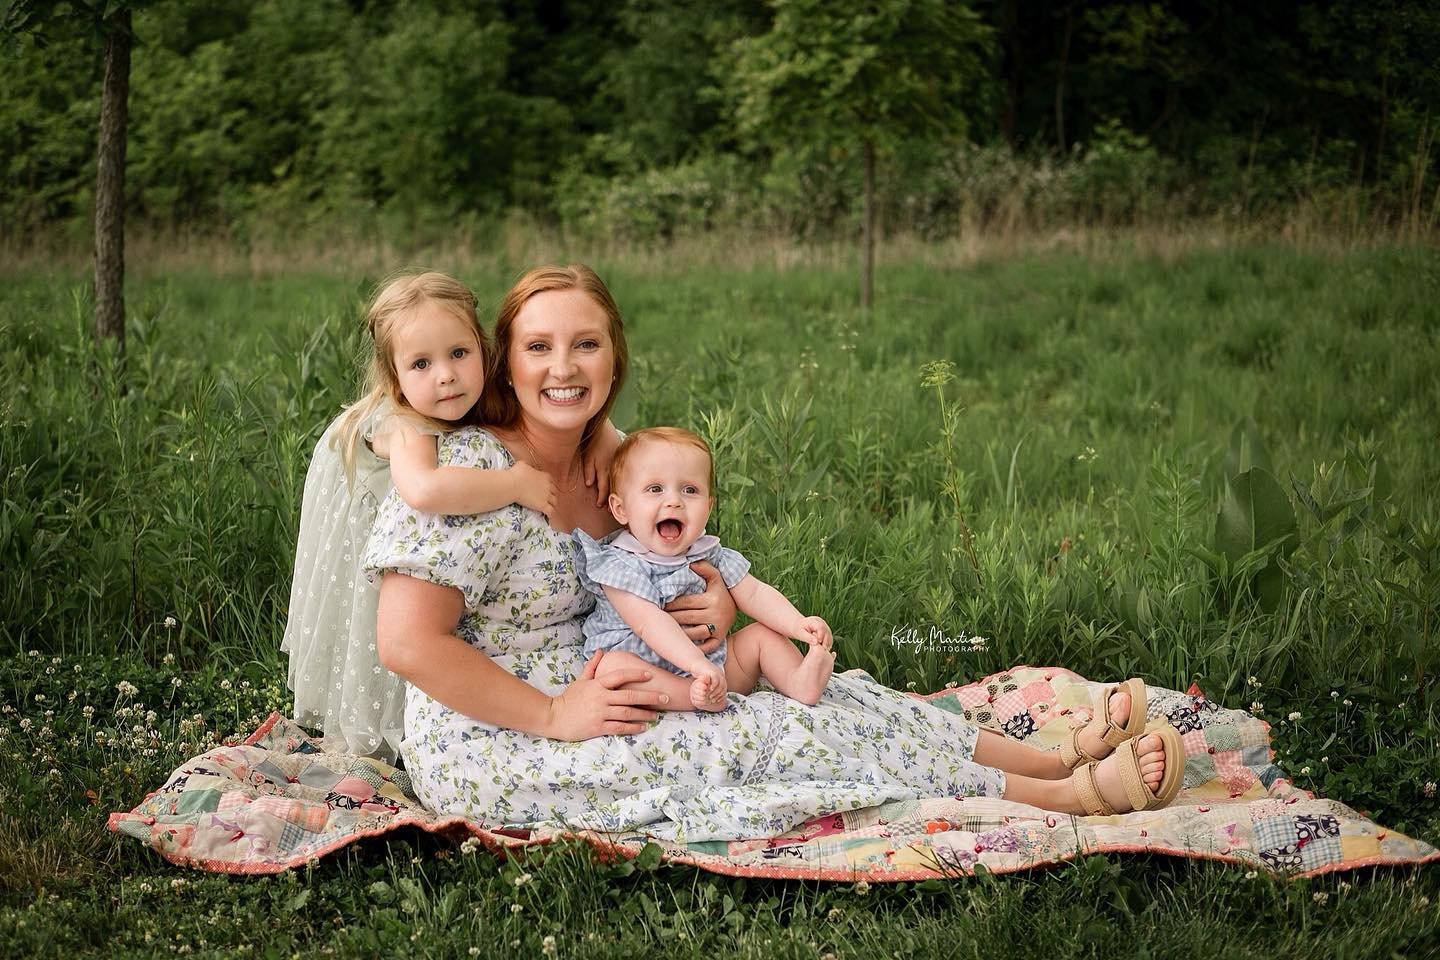 Sticking with the Mothers Day theme with this one 🥰#kellymartinphotography #indianapolisfamilyphotographer #zionsvillefamilyphotographer